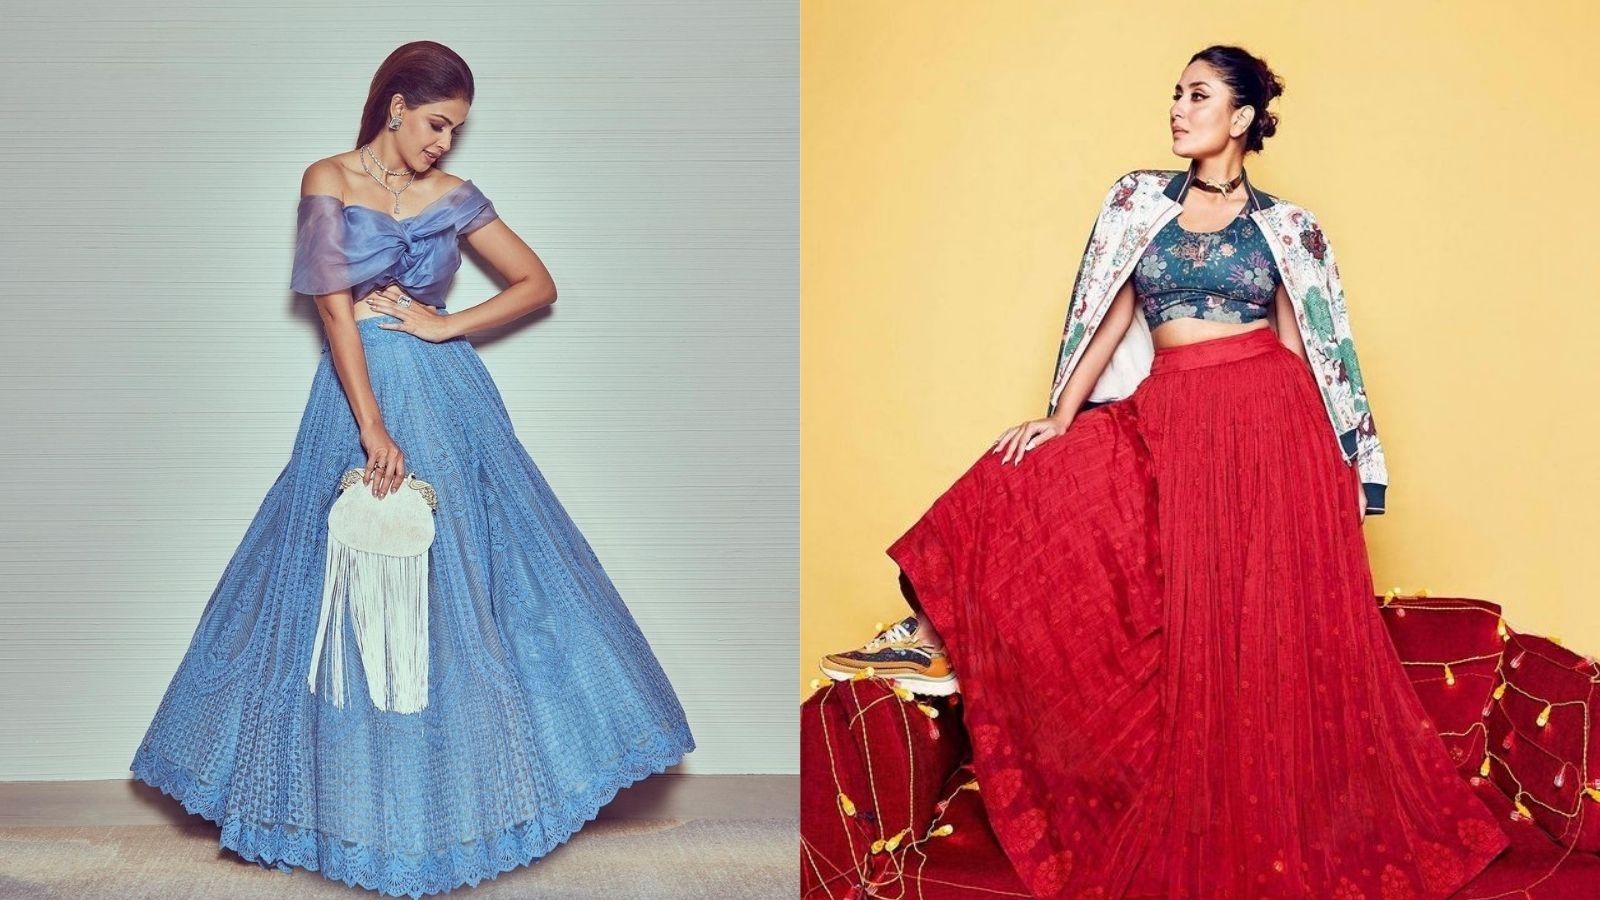 Tips to Choose the Right Lehenga Choli as Per Your Body Type